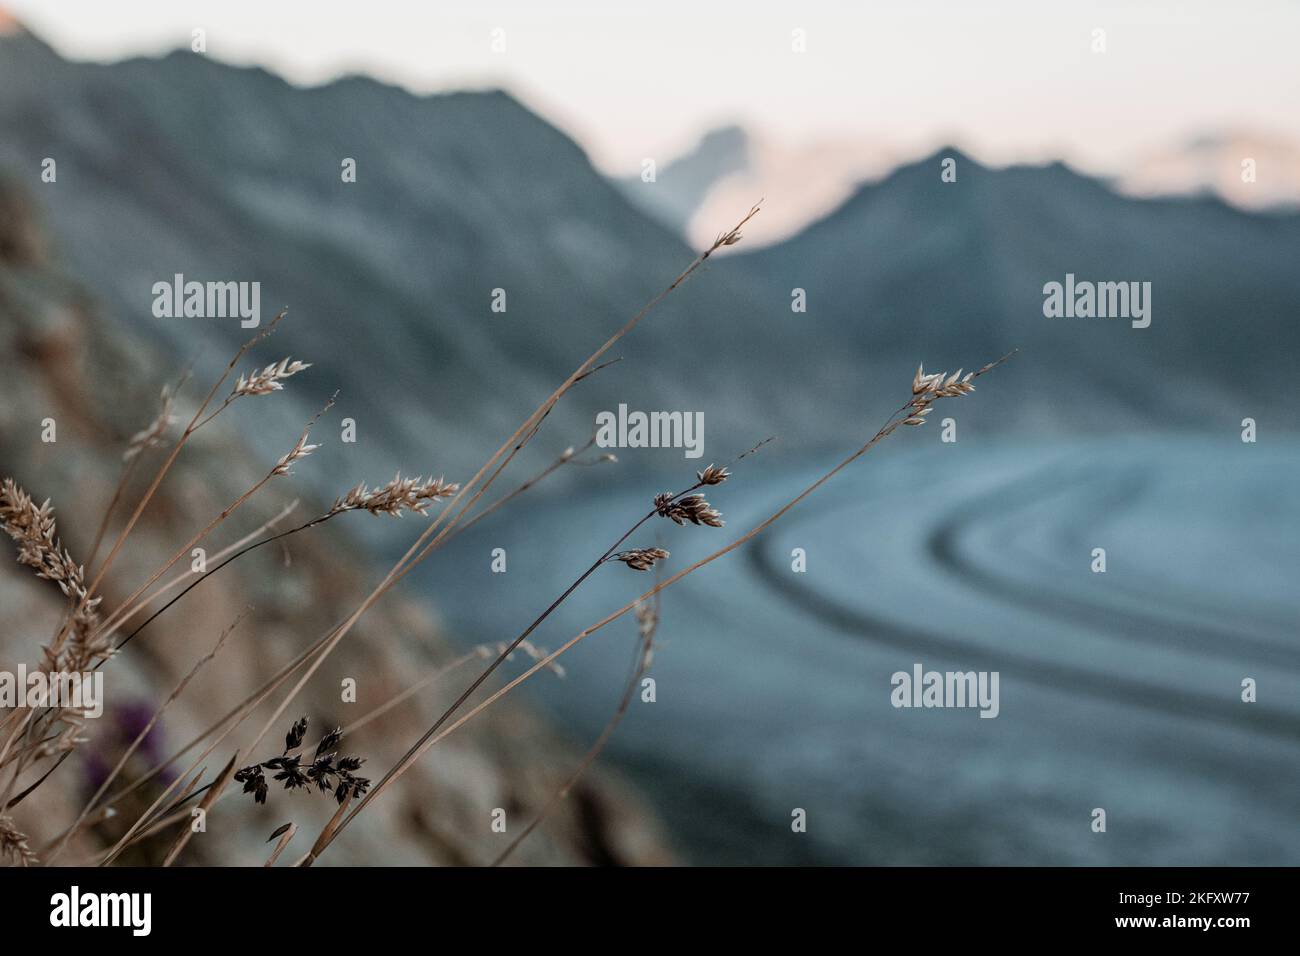 A closeup shot of the wild reeds growing near the snowy mountains of Switzerland Stock Photo